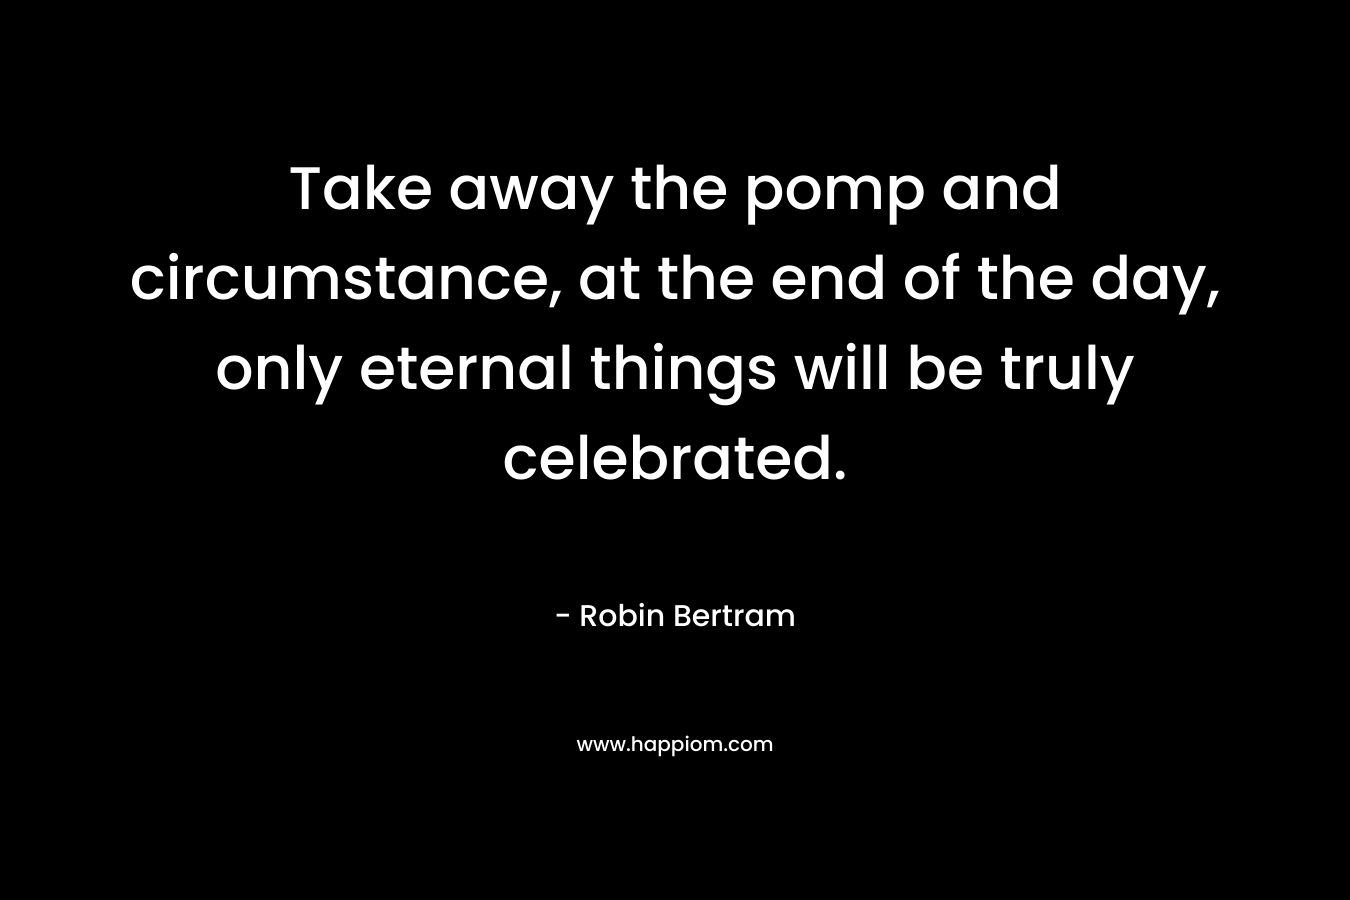 Take away the pomp and circumstance, at the end of the day, only eternal things will be truly celebrated. – Robin Bertram